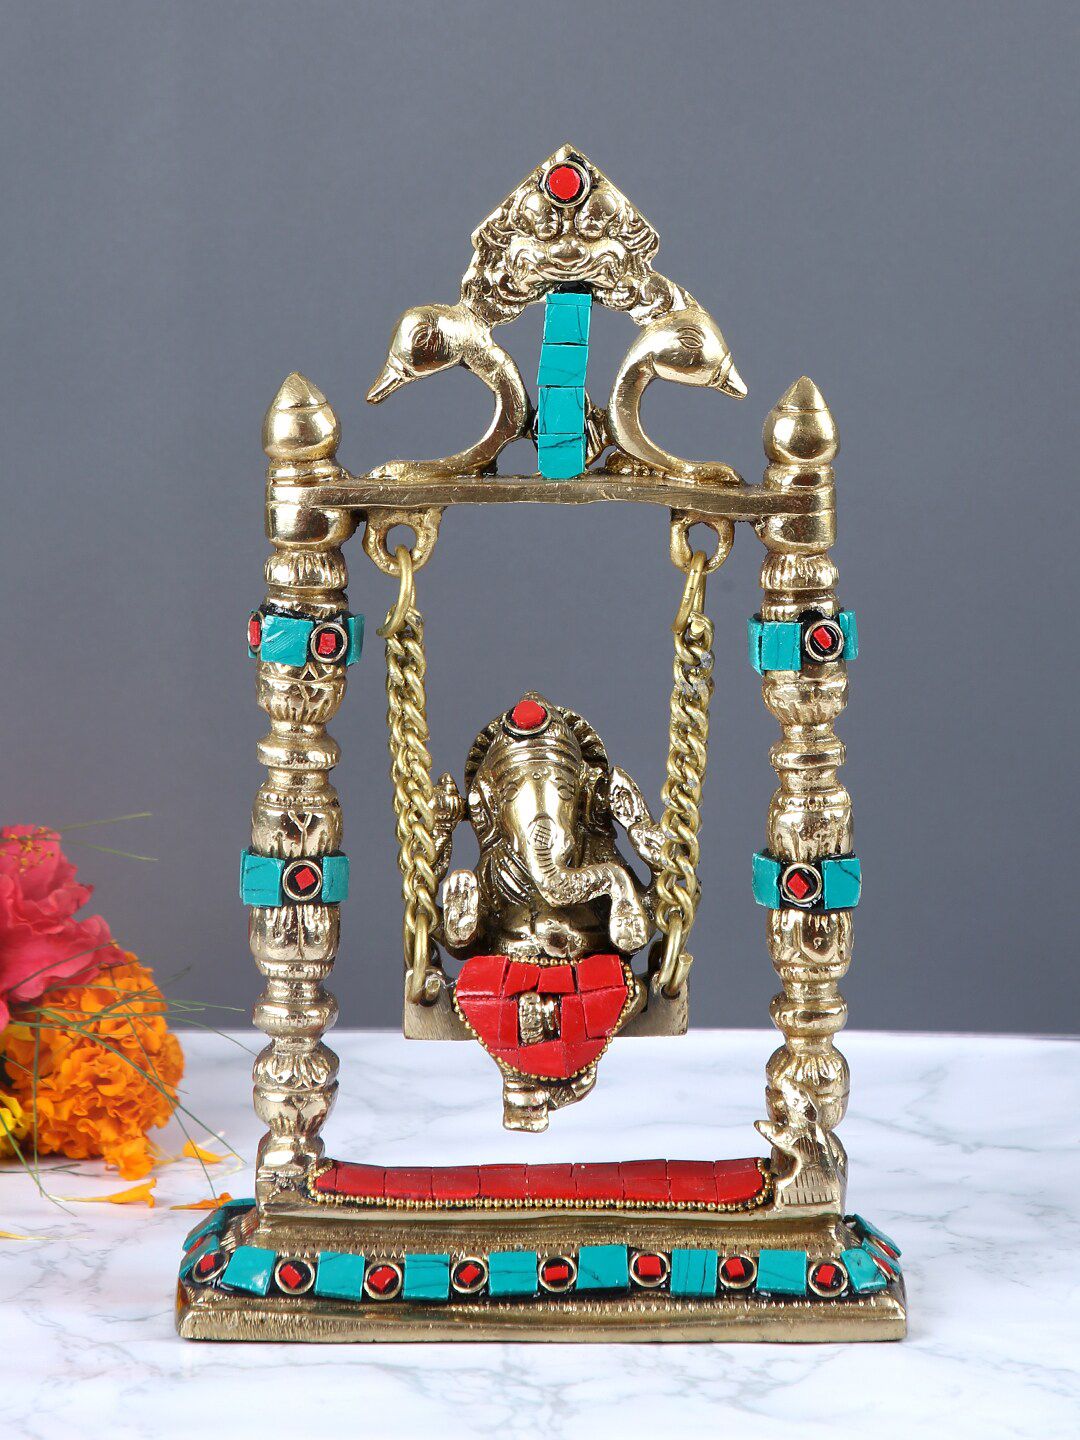 Aapno Rajasthan Gold-Toned & Red Handcrafted Lord Ganesh Jhula Statue Price in India